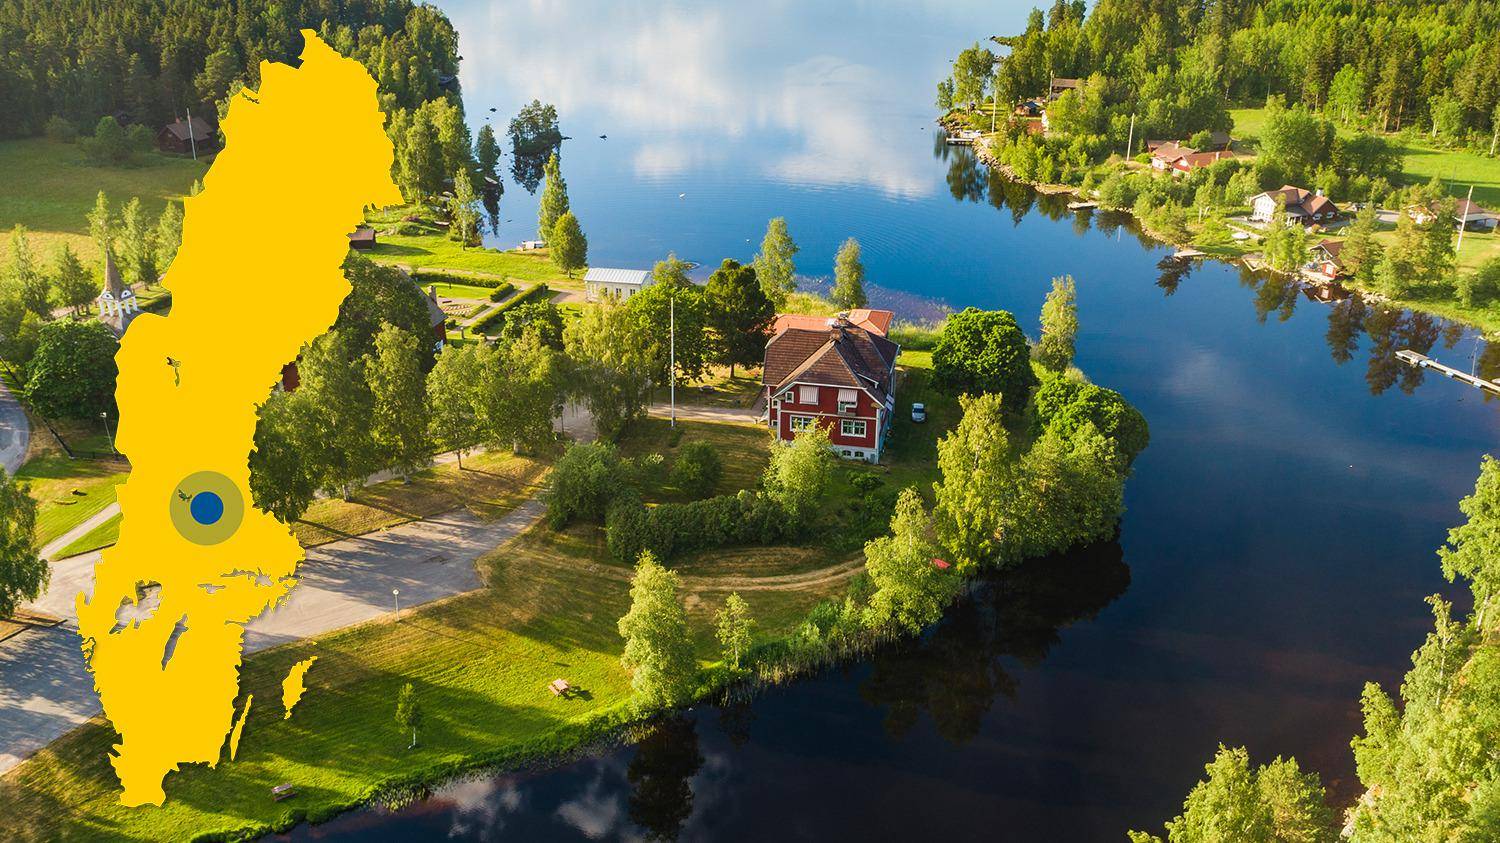 A river flows into a lake. There are a couple of houses surrounded by greenery next to the lake.There is a yellow map of Sweden with a blue dot that marks Toftan.